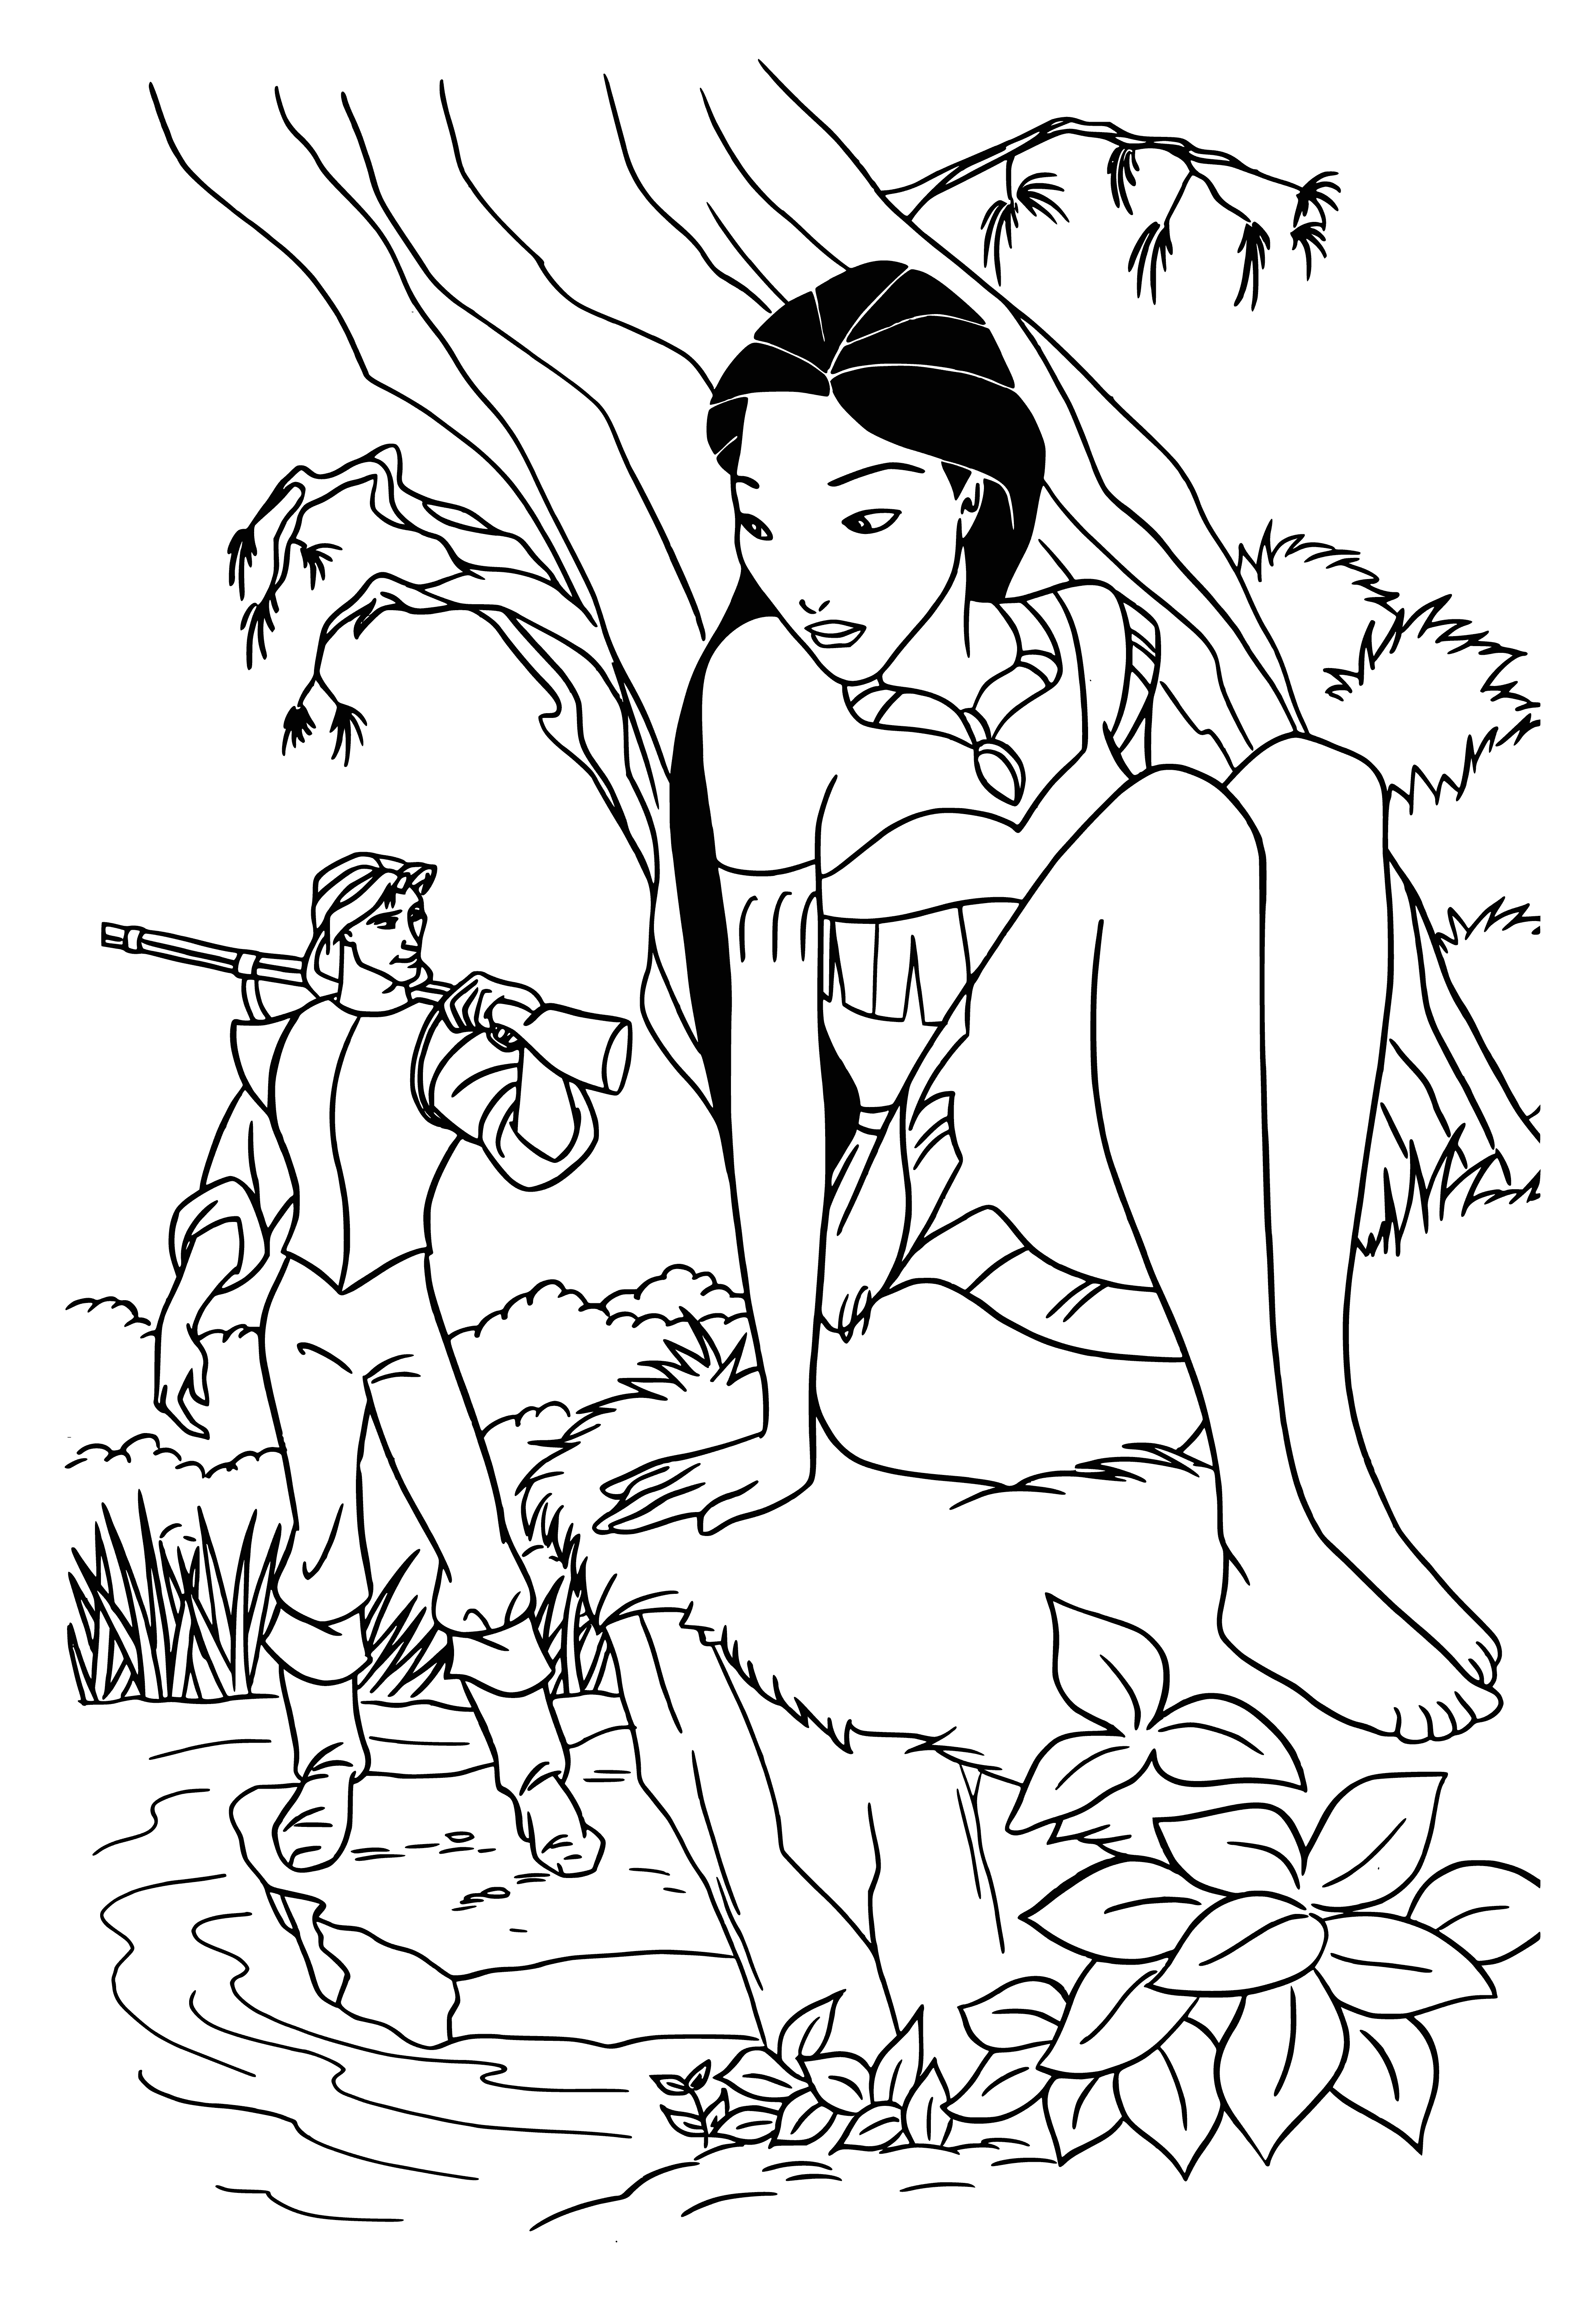 coloring page: English sailor John Smith captured by Indians and saved by Pocahontas, 11yo daughter of Chief Powhatan, who declared Smith her husband.